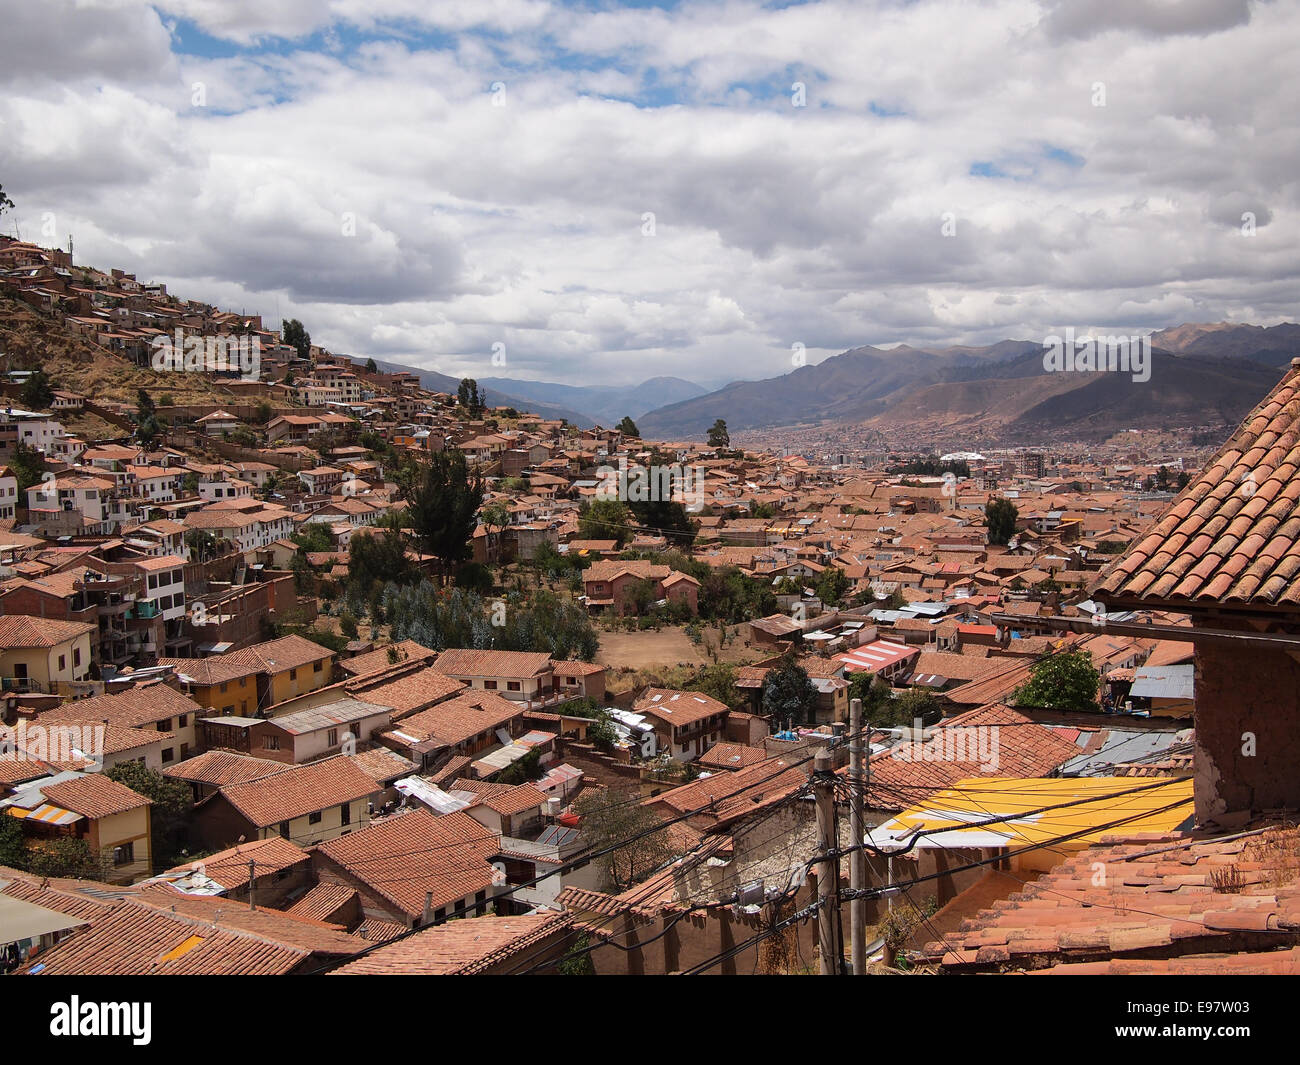 View over the orange tile roofs of the touristic city center of Cusco, near Machu Picchu, in Peru. Stock Photo